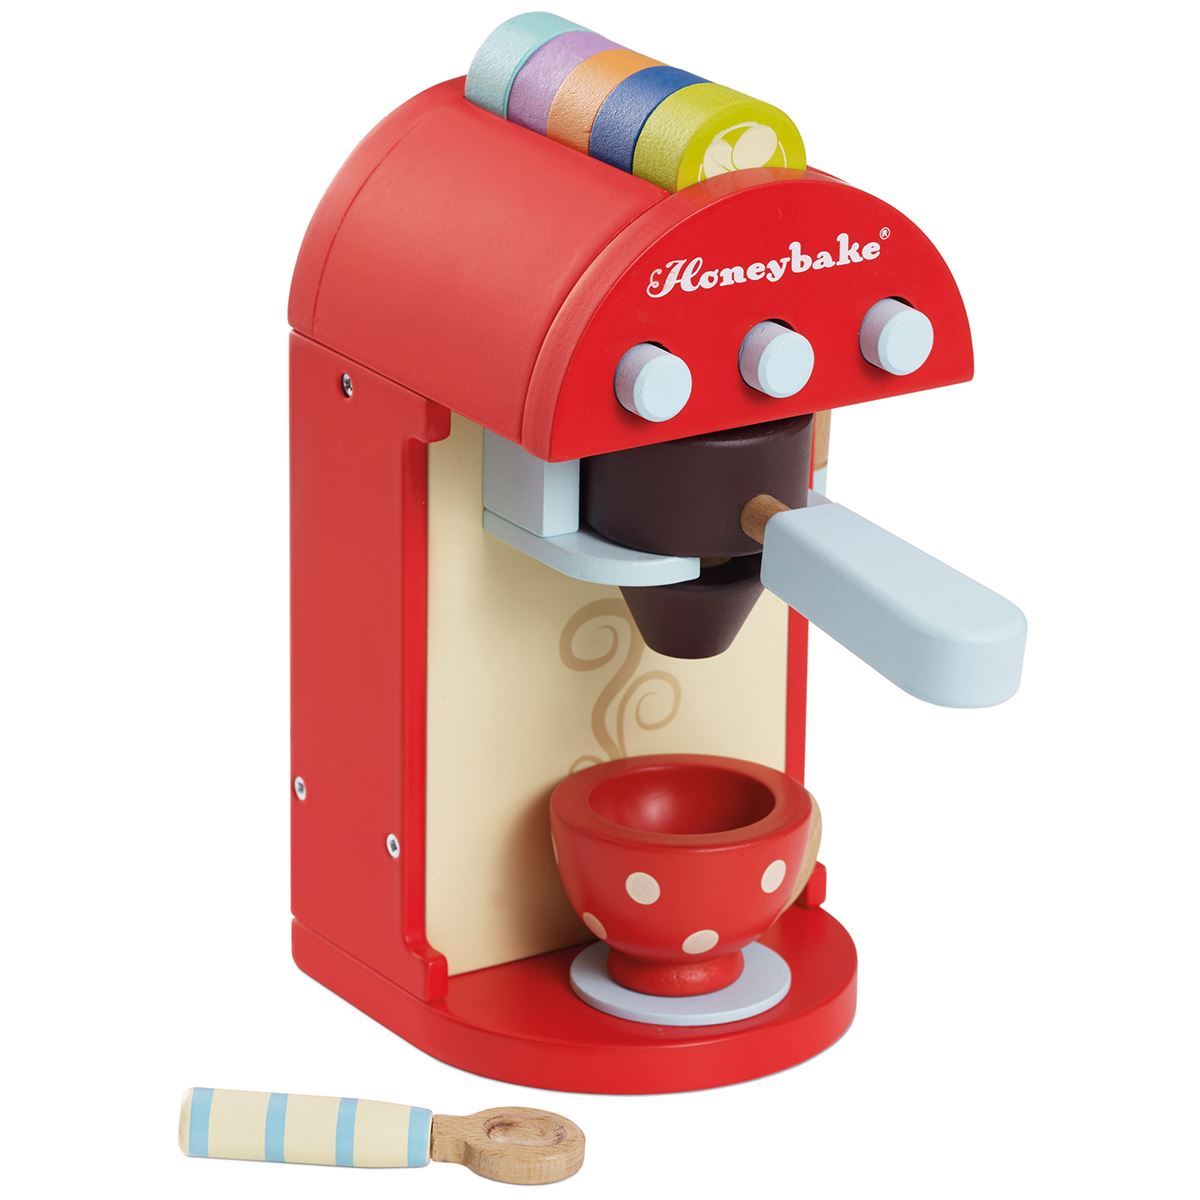 Le Toy Van TV299 Honeybake Collection-Cafe Machine Playset 